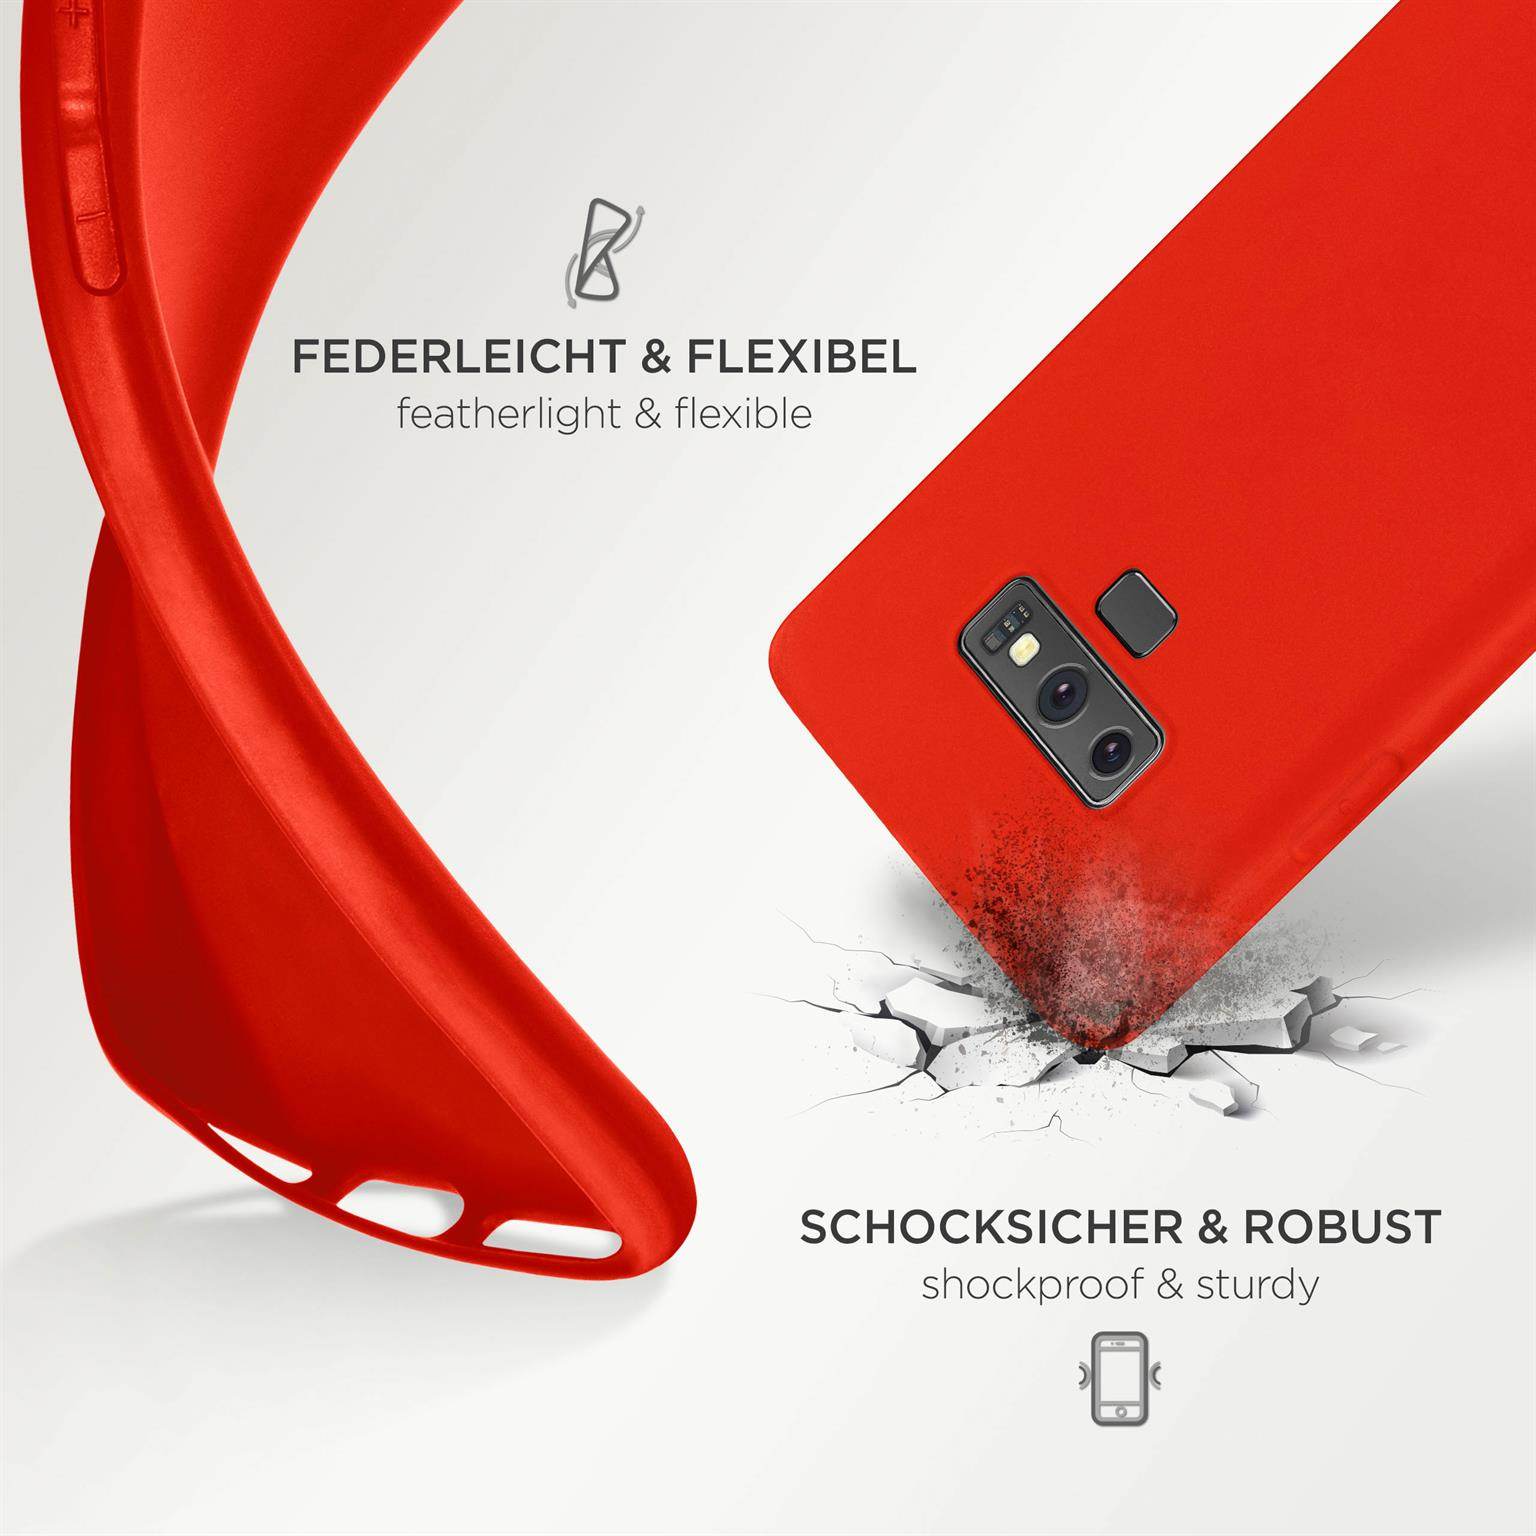 Samsung, Note 9, Case, Galaxy SlimShield ONEFLOW Pro Backcover, Rot